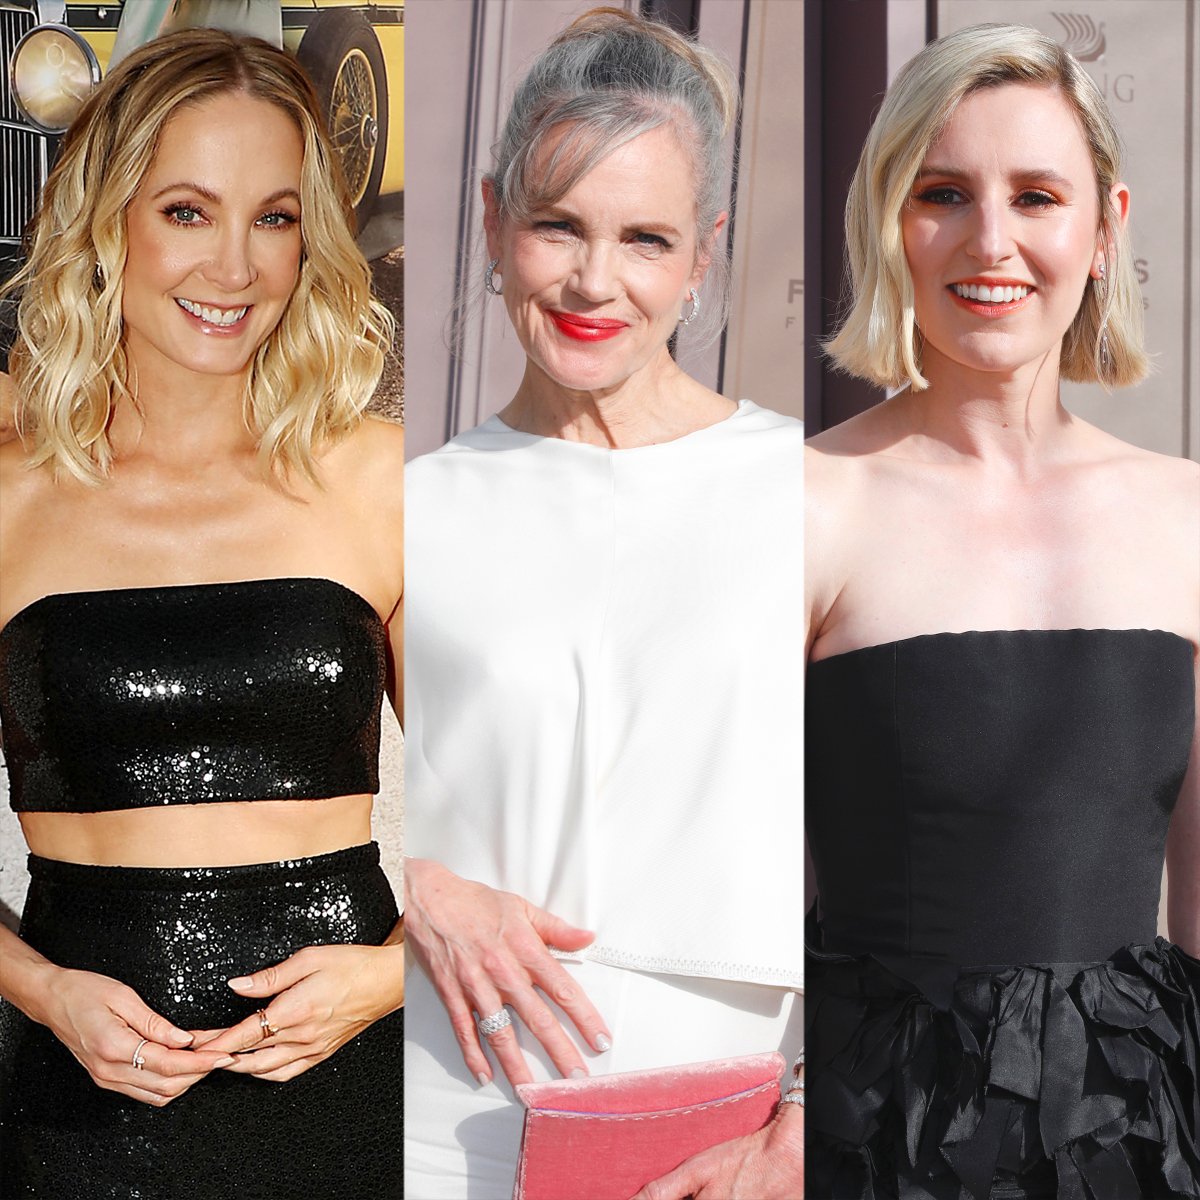 Photo Call for Downton Abbey cast members supporting charity night